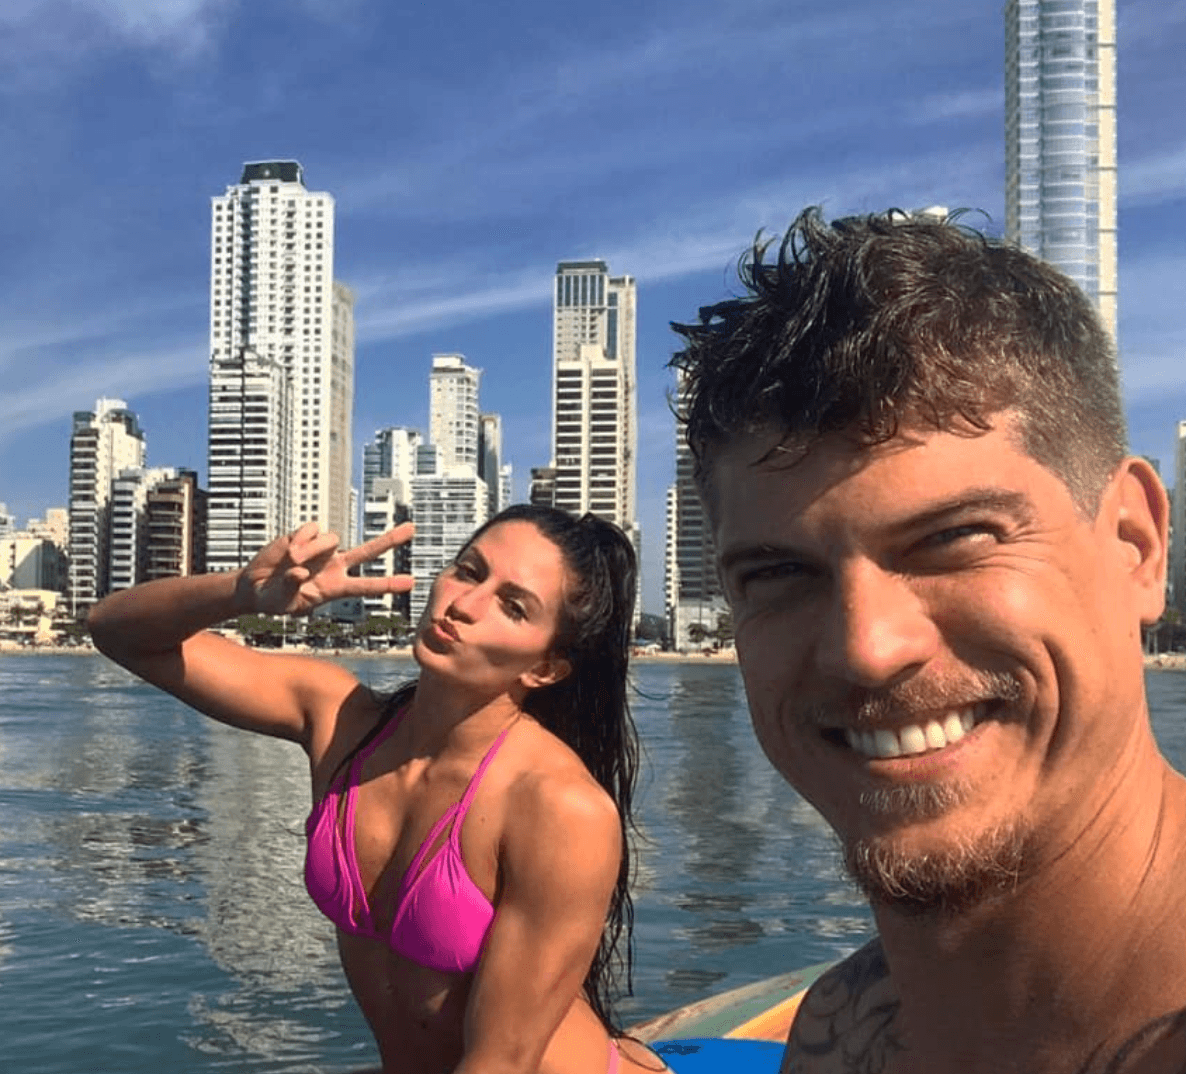 Men's Dating Coach | How to Meet the Girl of Your Dreams |  Diego, my #1 Client Here on the Beach in Brazil with a girl in a Pink bikini with dark eyes and Dark hair!